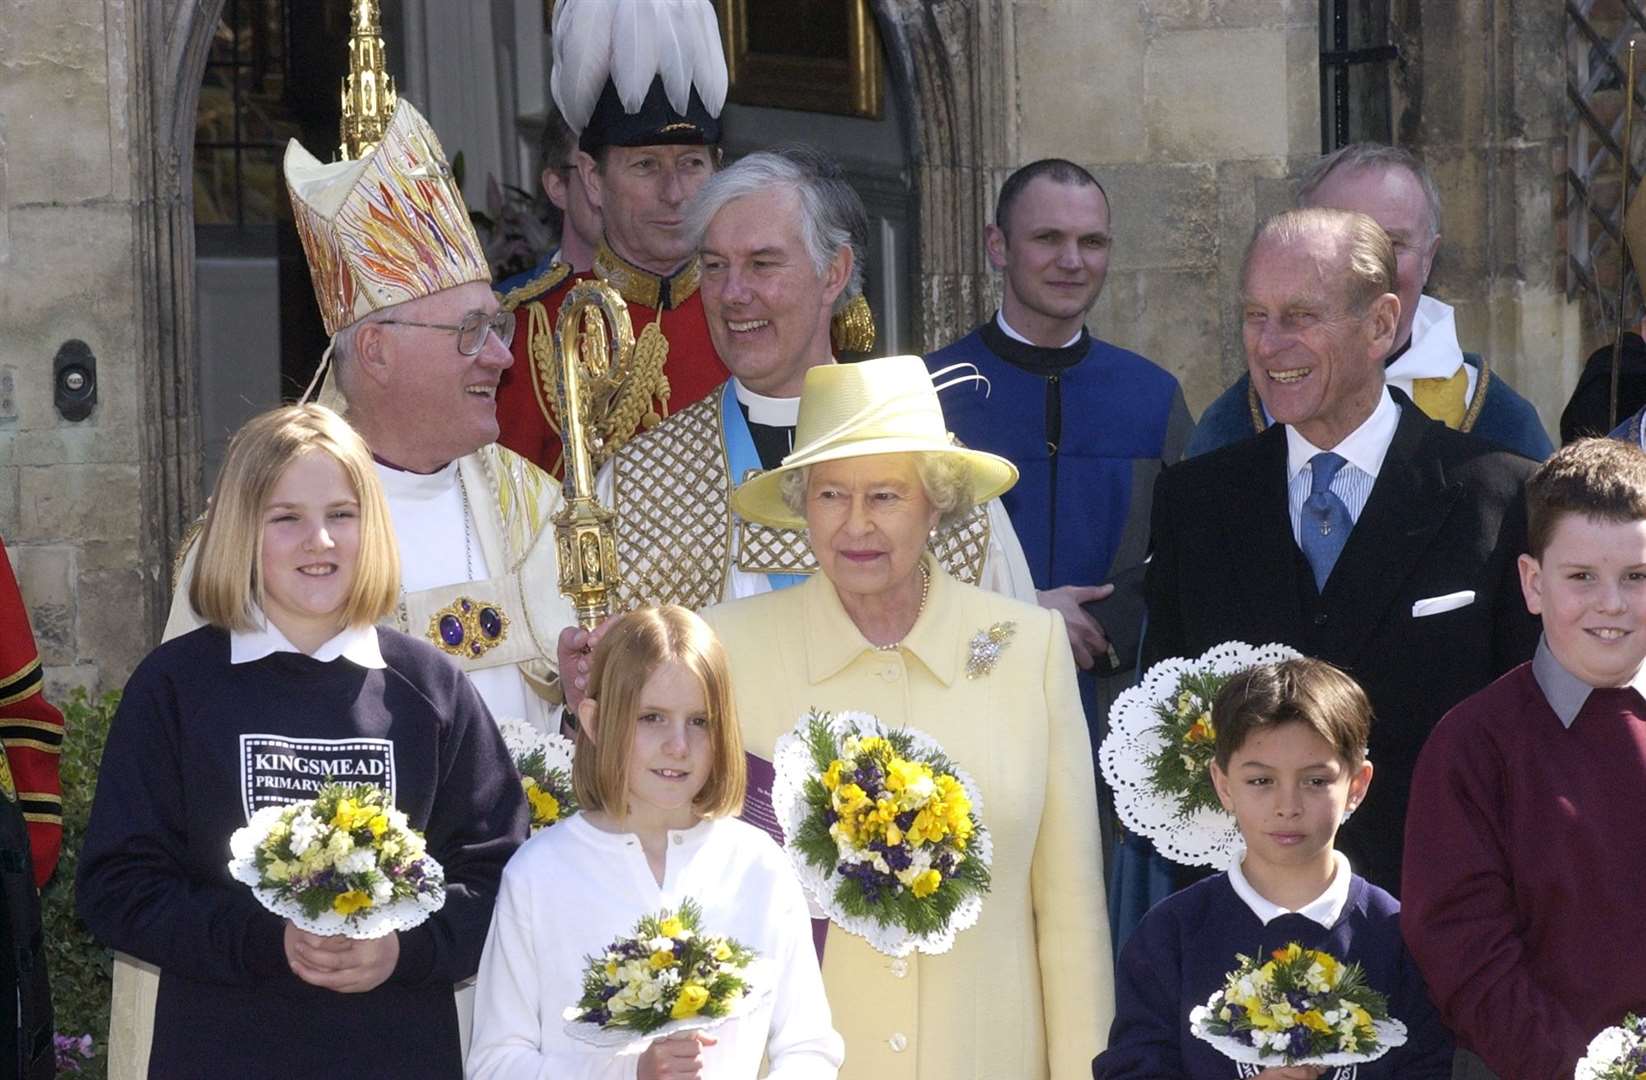 The Queen and Prince Philip at Canterbury Cathedral 20 years ago